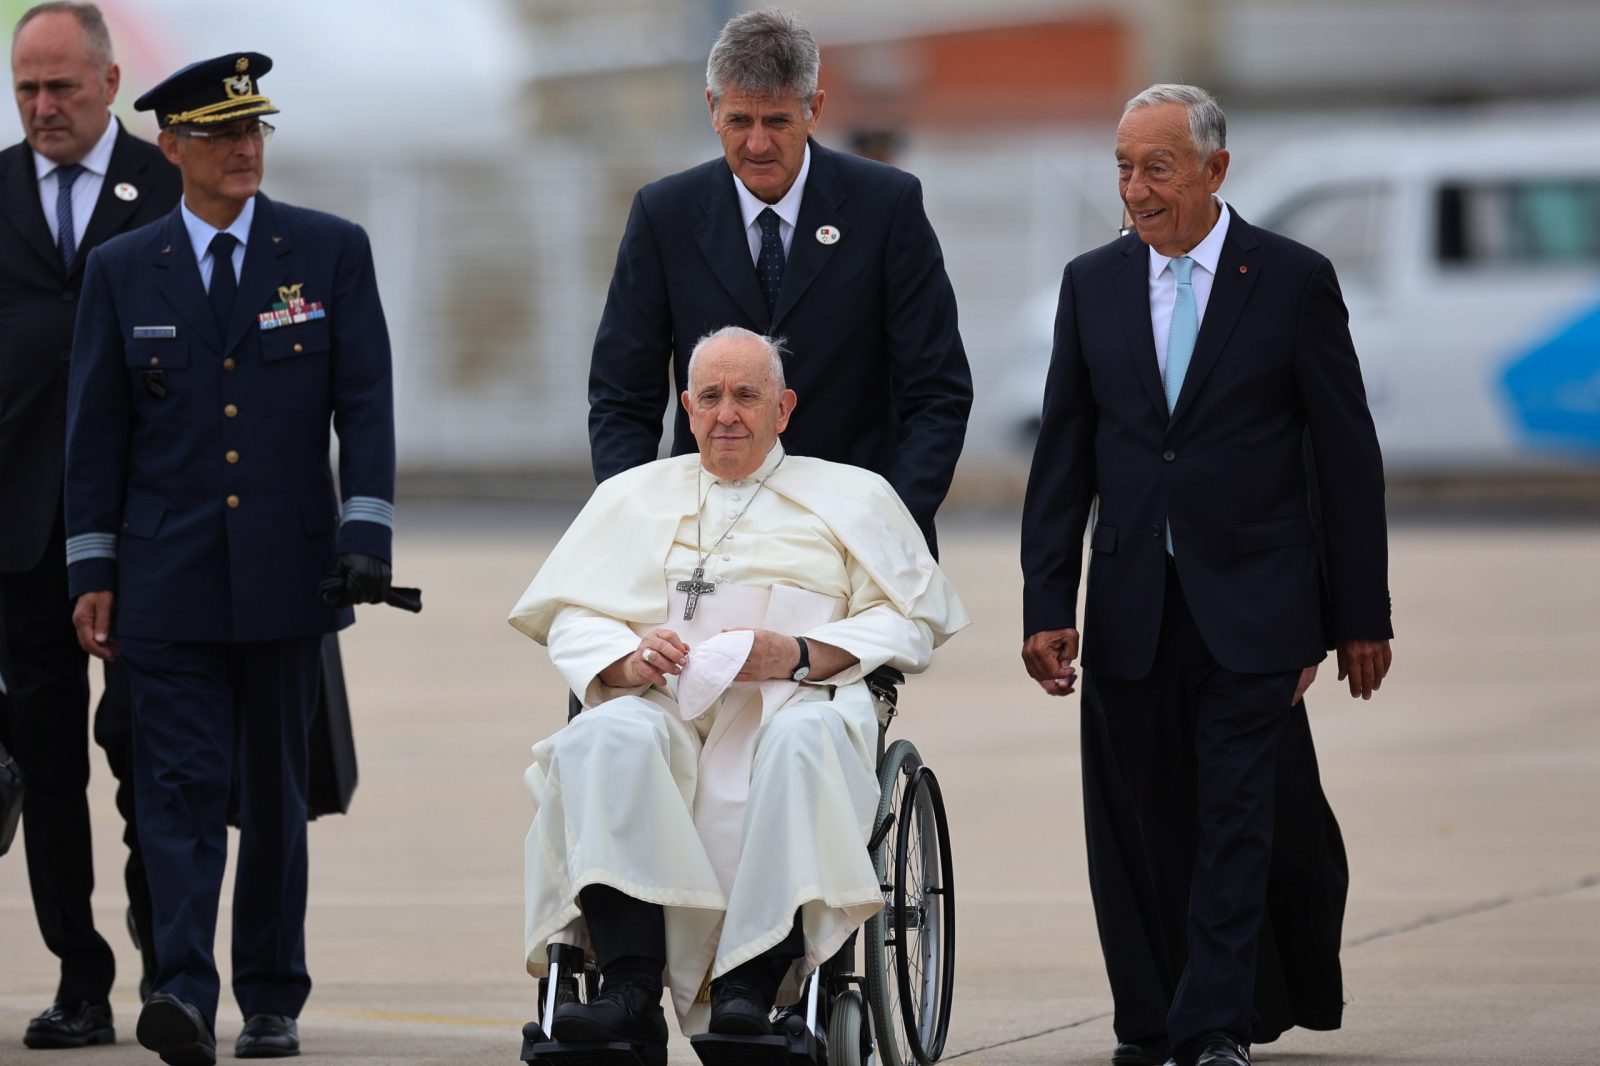 epa10781020 Pope Francis is welcomed by Portugal's President Marcelo Rebelo de Sousa (R) upon his arrival at Figo Maduro airbase in Lisbon, Portugal, 02 August 2023. The Pontiff will be in Portugal on the occasion of World Youth Day (WYD), one of the main events of the Church that gathers the Pope with youngsters from around the world, that takes place until 06 August.  EPA/ANTONIO COTRIM / POOL